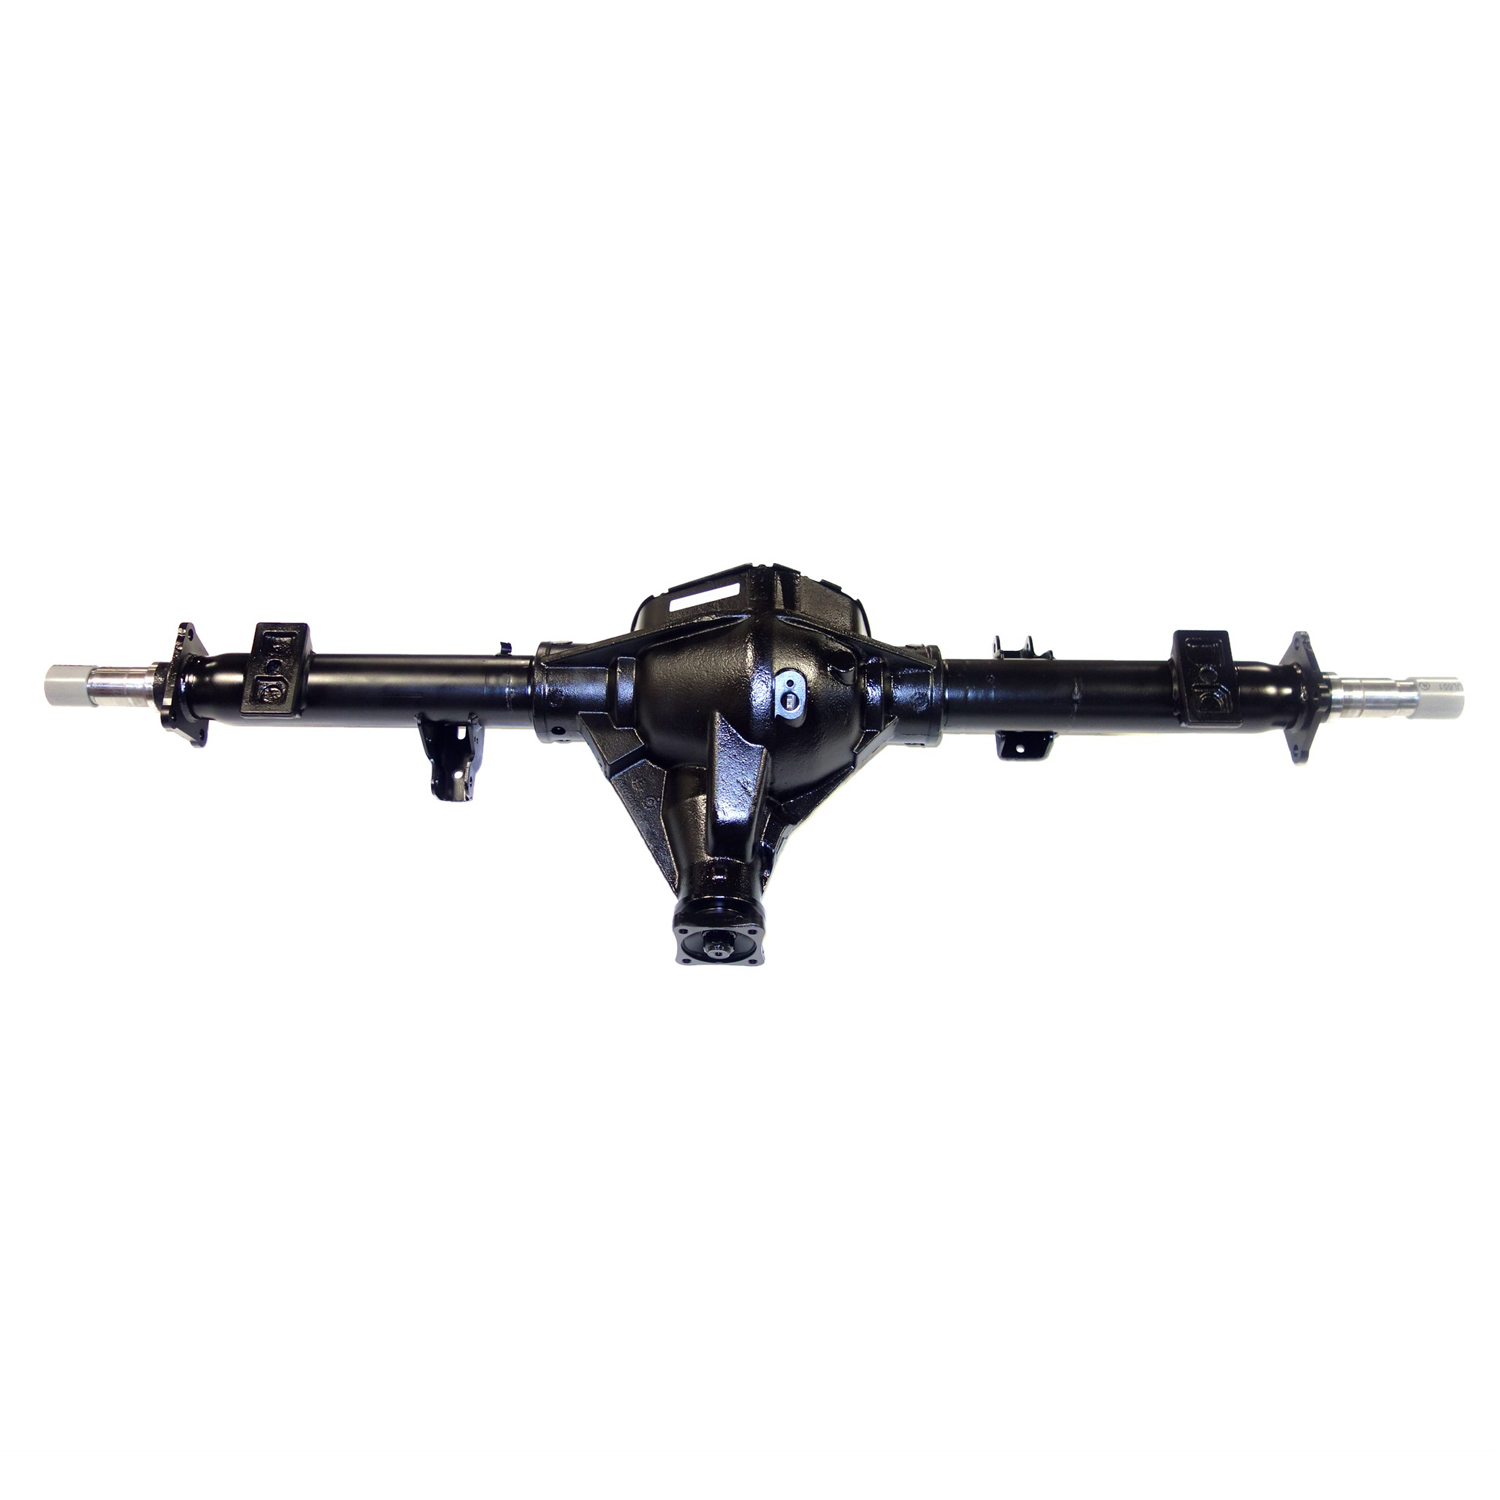 Remanufactured Axle Assy for Chy 11.5" 2009 Ram 2500 & 3500 3.42 , SRW, 2wd, Posi LSD